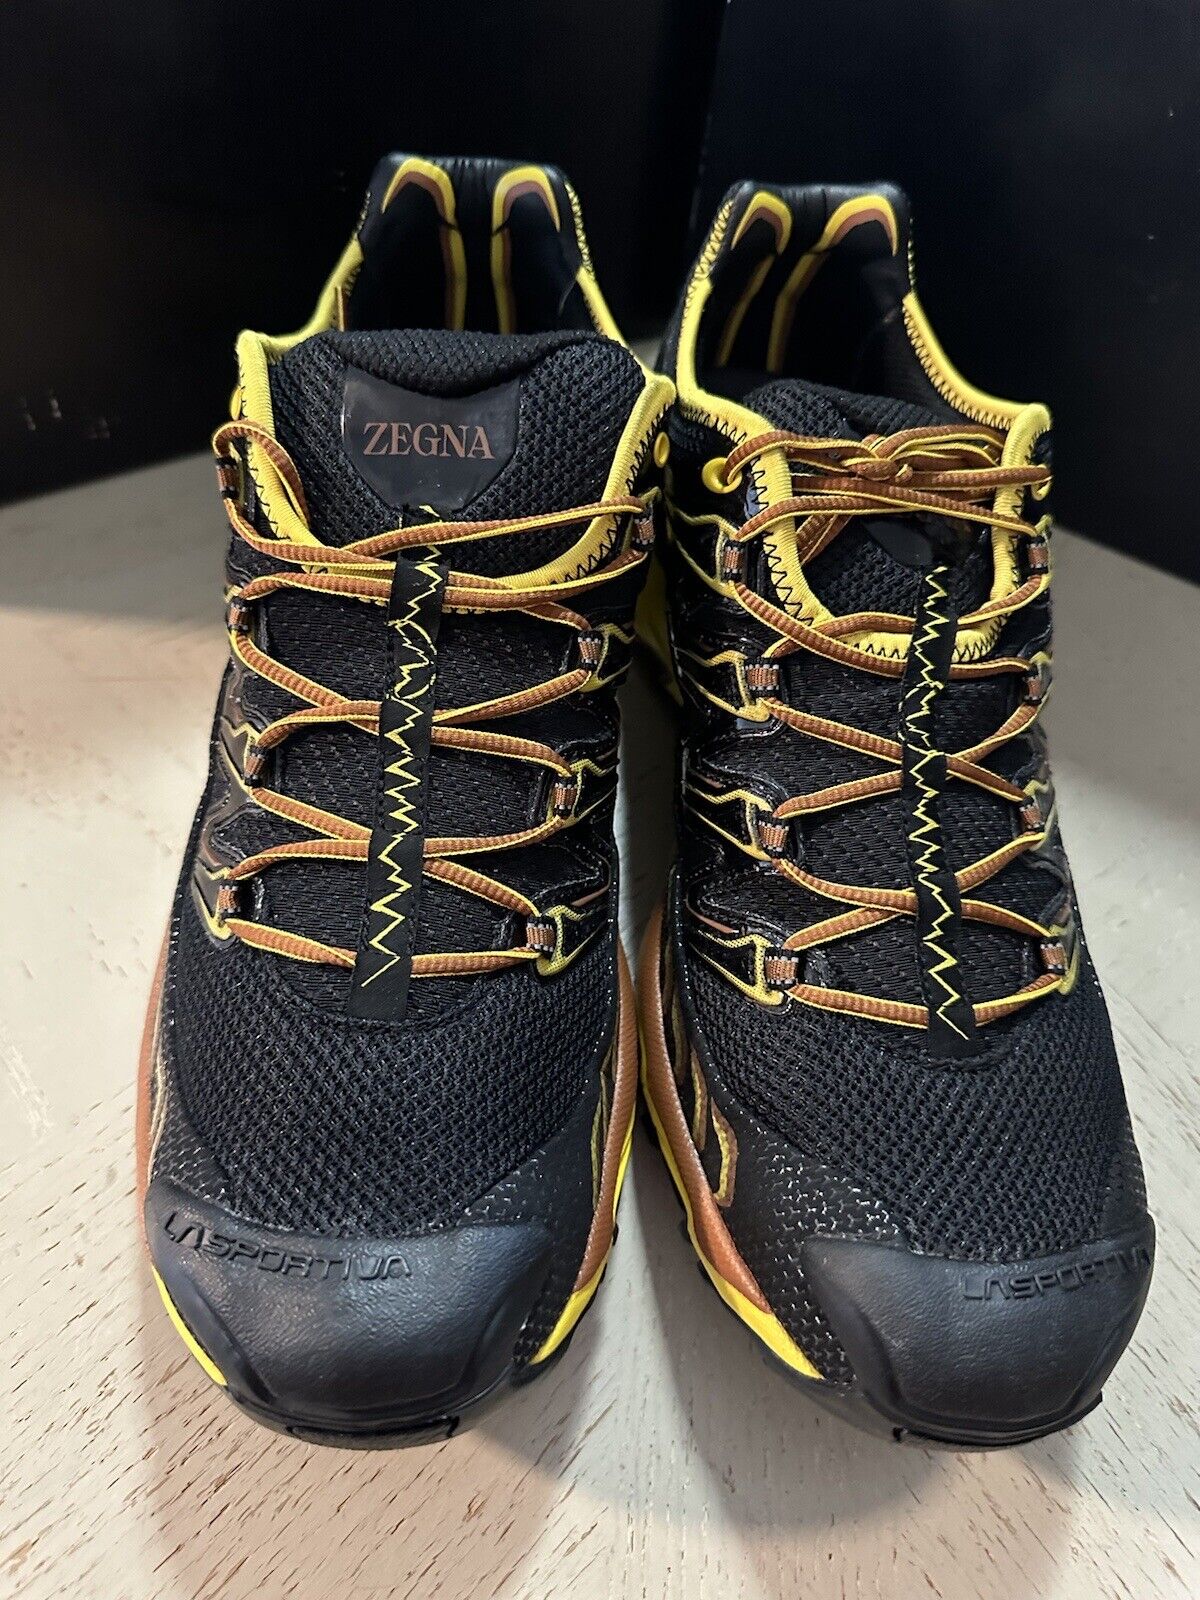 New Zegna Men Sneakers Shoes Black/Yellow/Brown 10.5 US